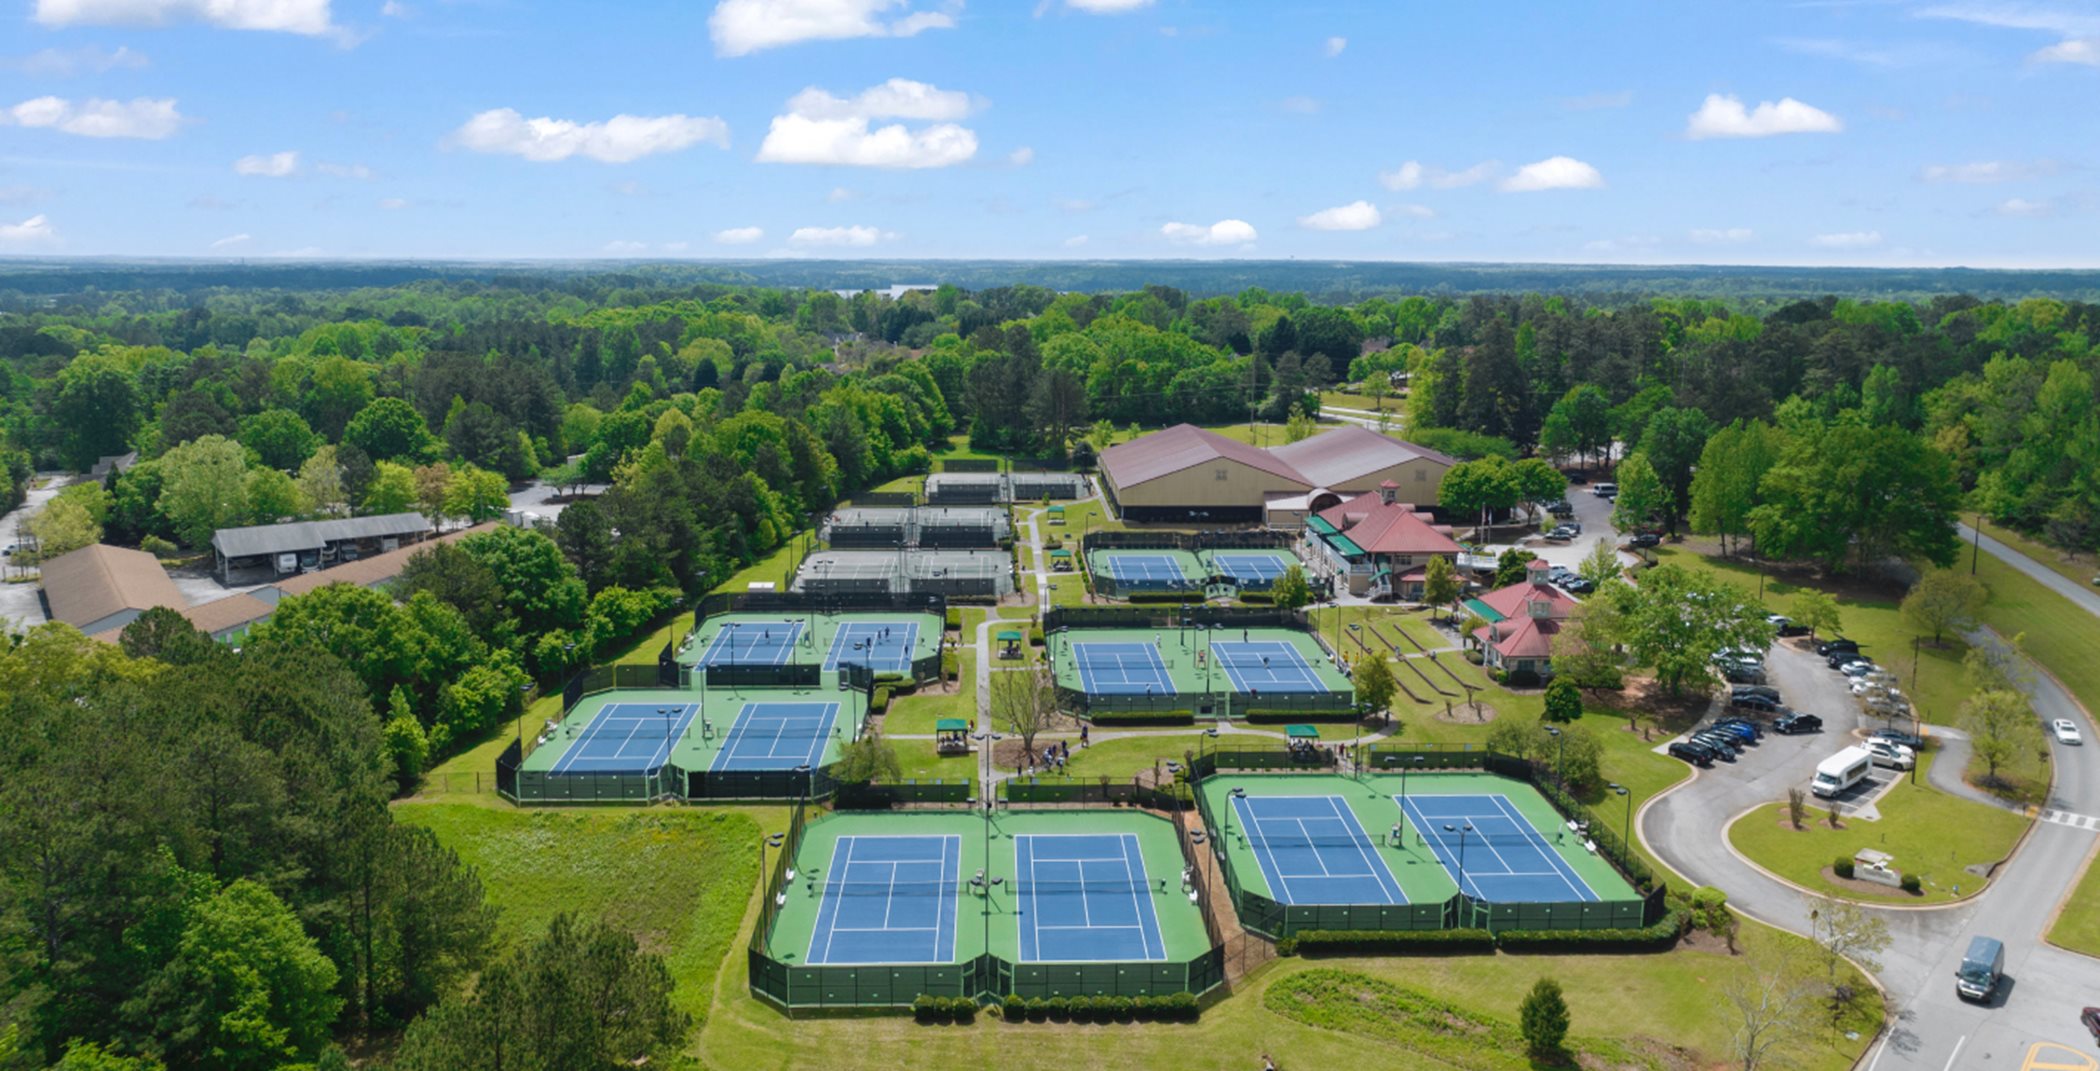 Peachtree City features tons of tennis and pickleball courts